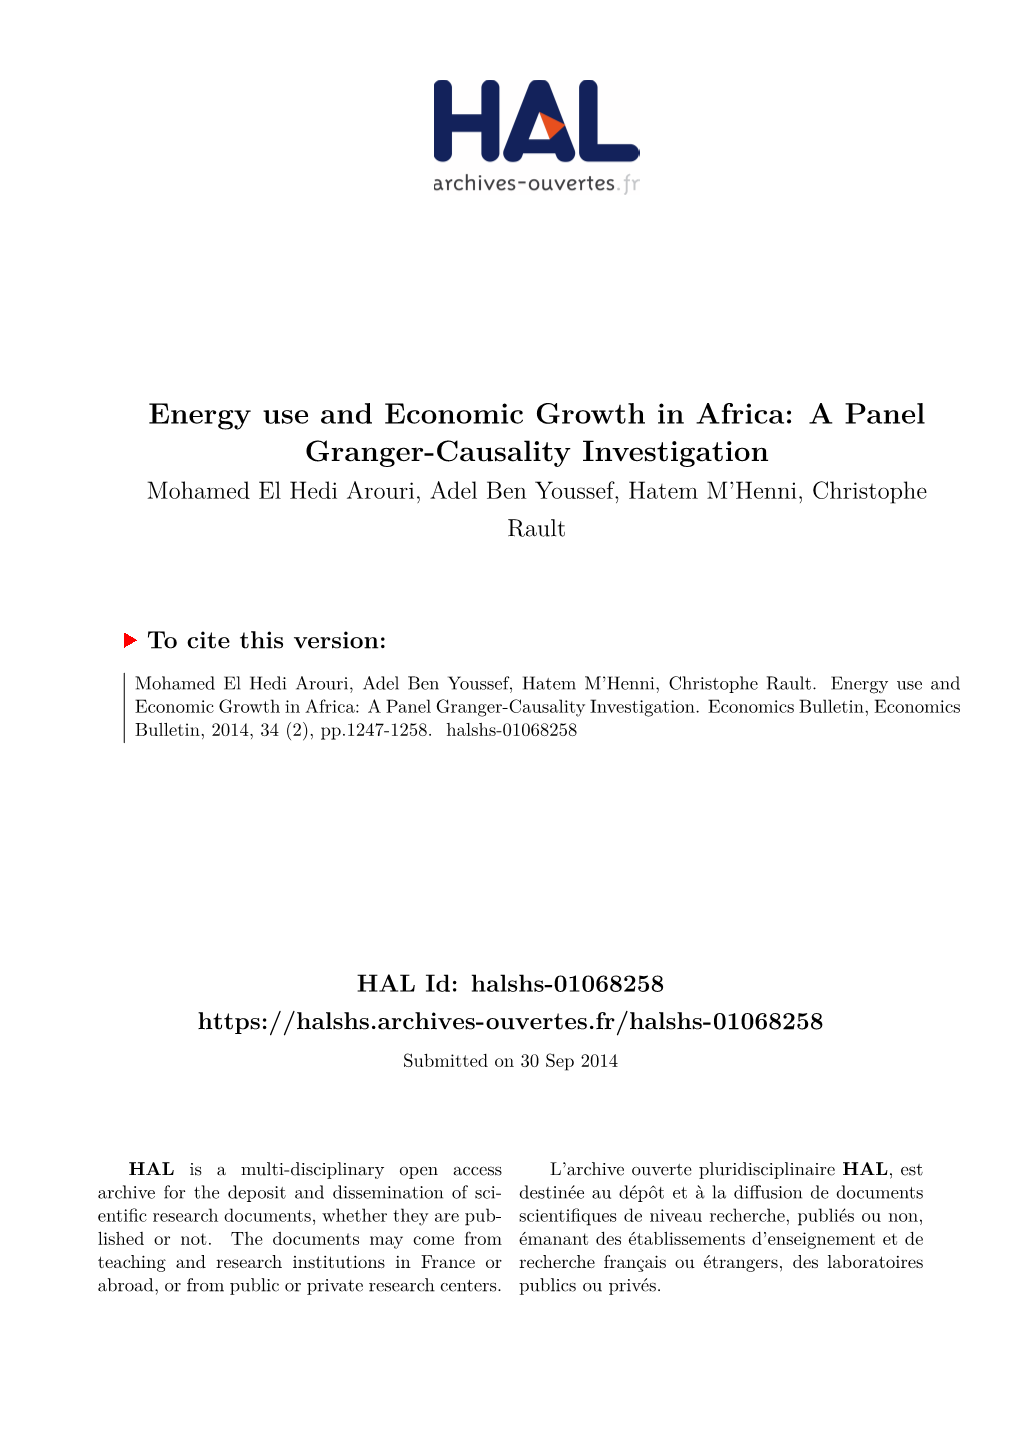 Energy Use and Economic Growth in Africa: a Panel Granger-Causality Investigation Mohamed El Hedi Arouri, Adel Ben Youssef, Hatem M’Henni, Christophe Rault